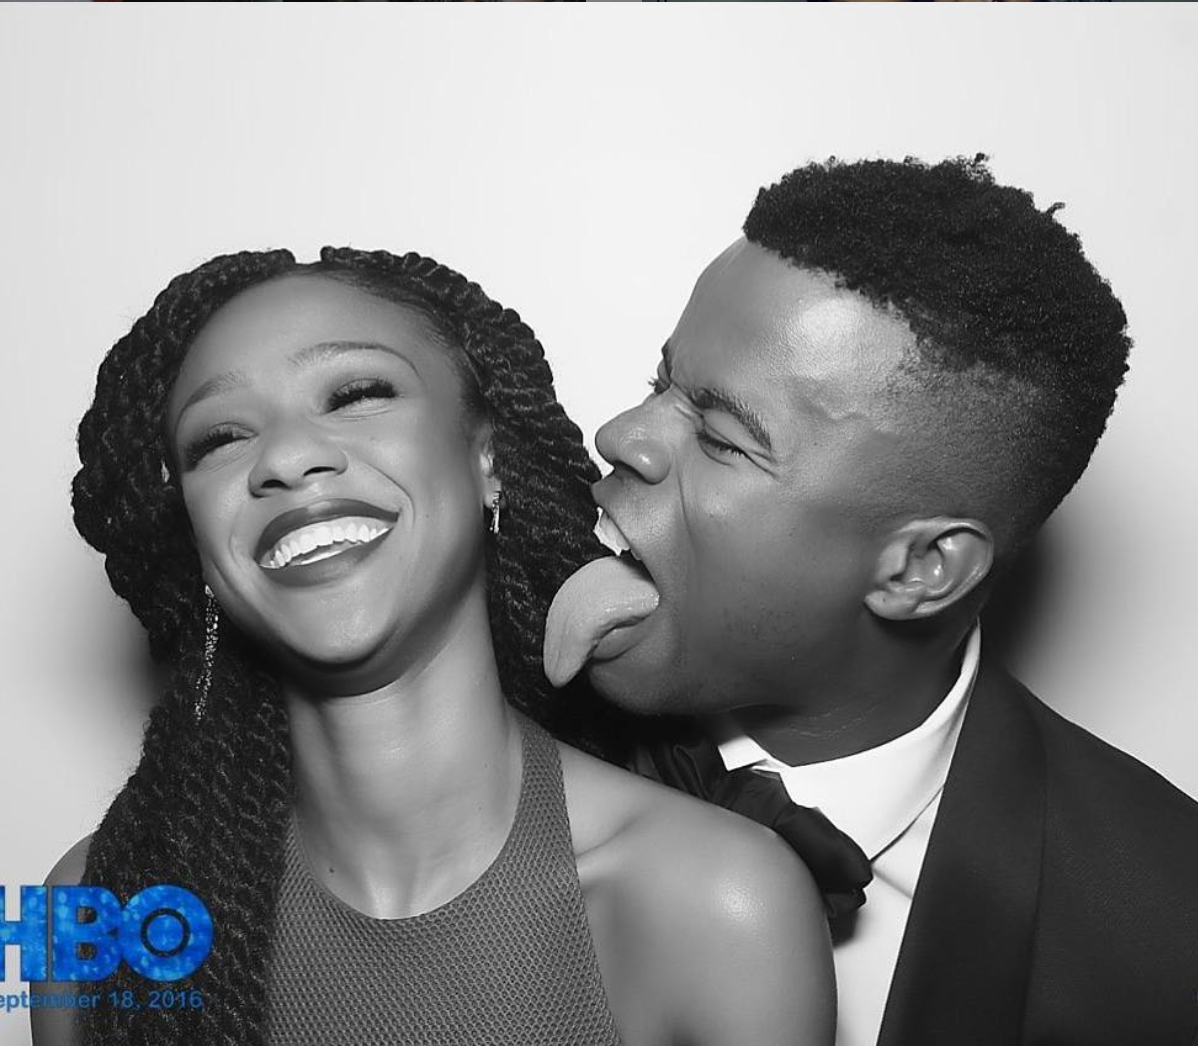 'The Chi' Star Tiffany Boone And Her Fiancé, 'Dear White People' Star Marque Richardson, Have The Sweetest Bond